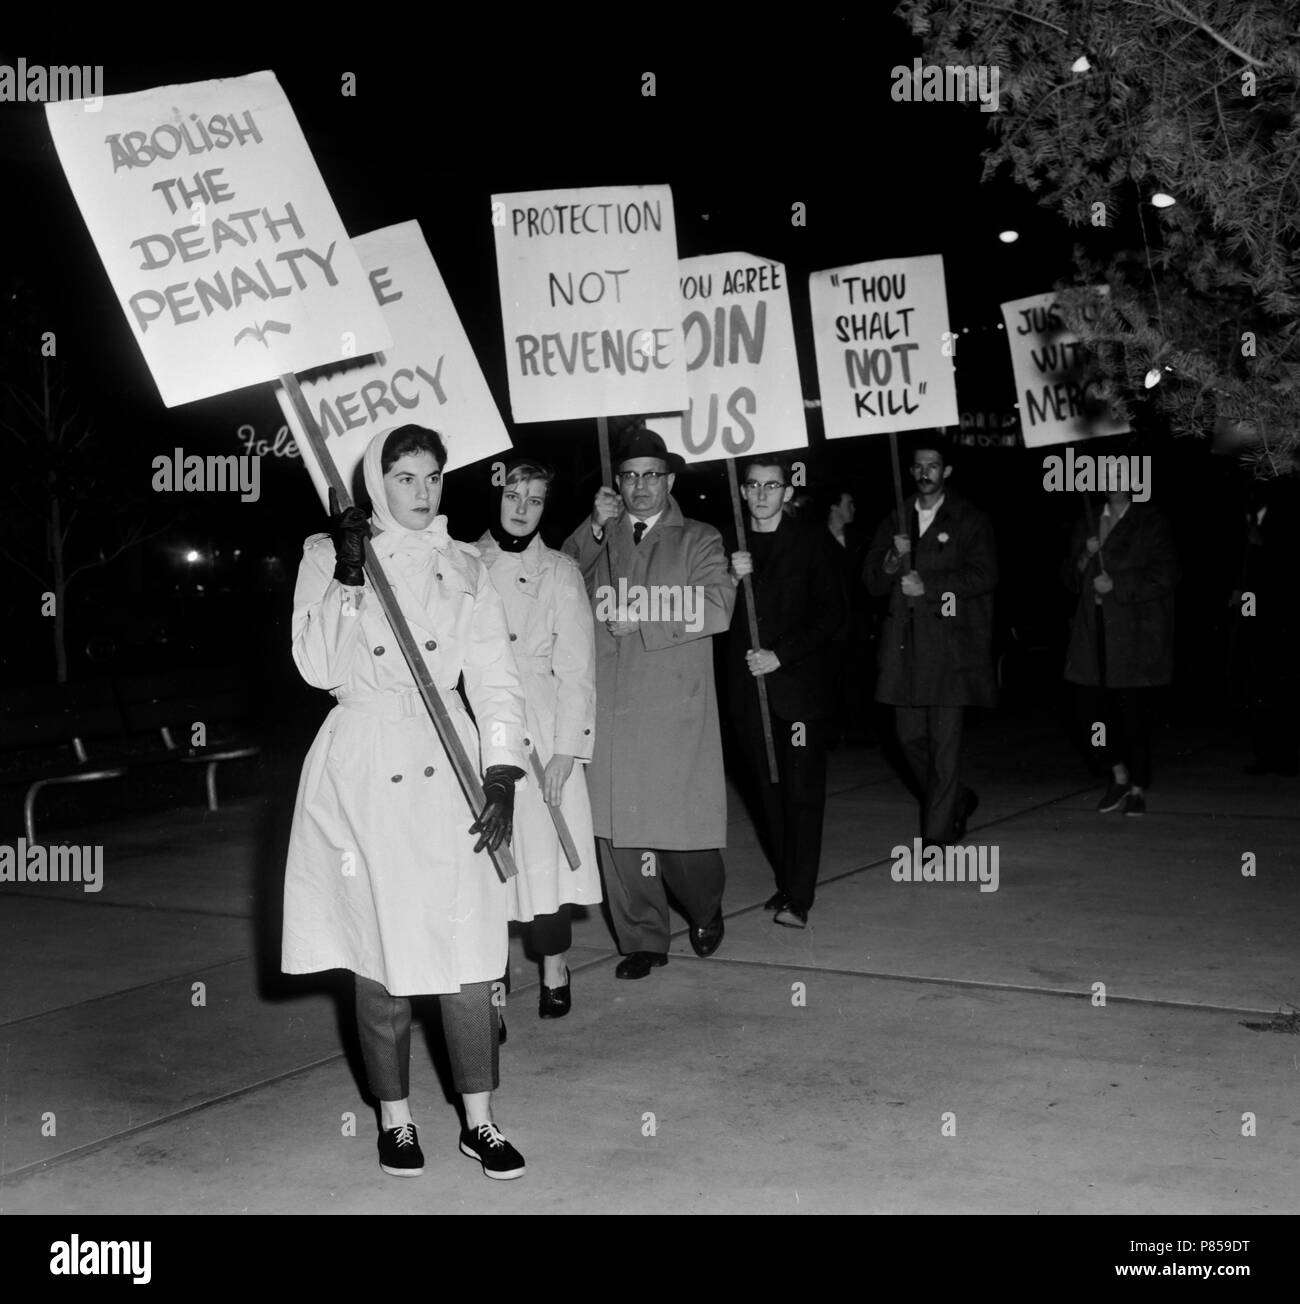 Christmas time protest over the death penalty in California, ca. 1960. Stock Photo